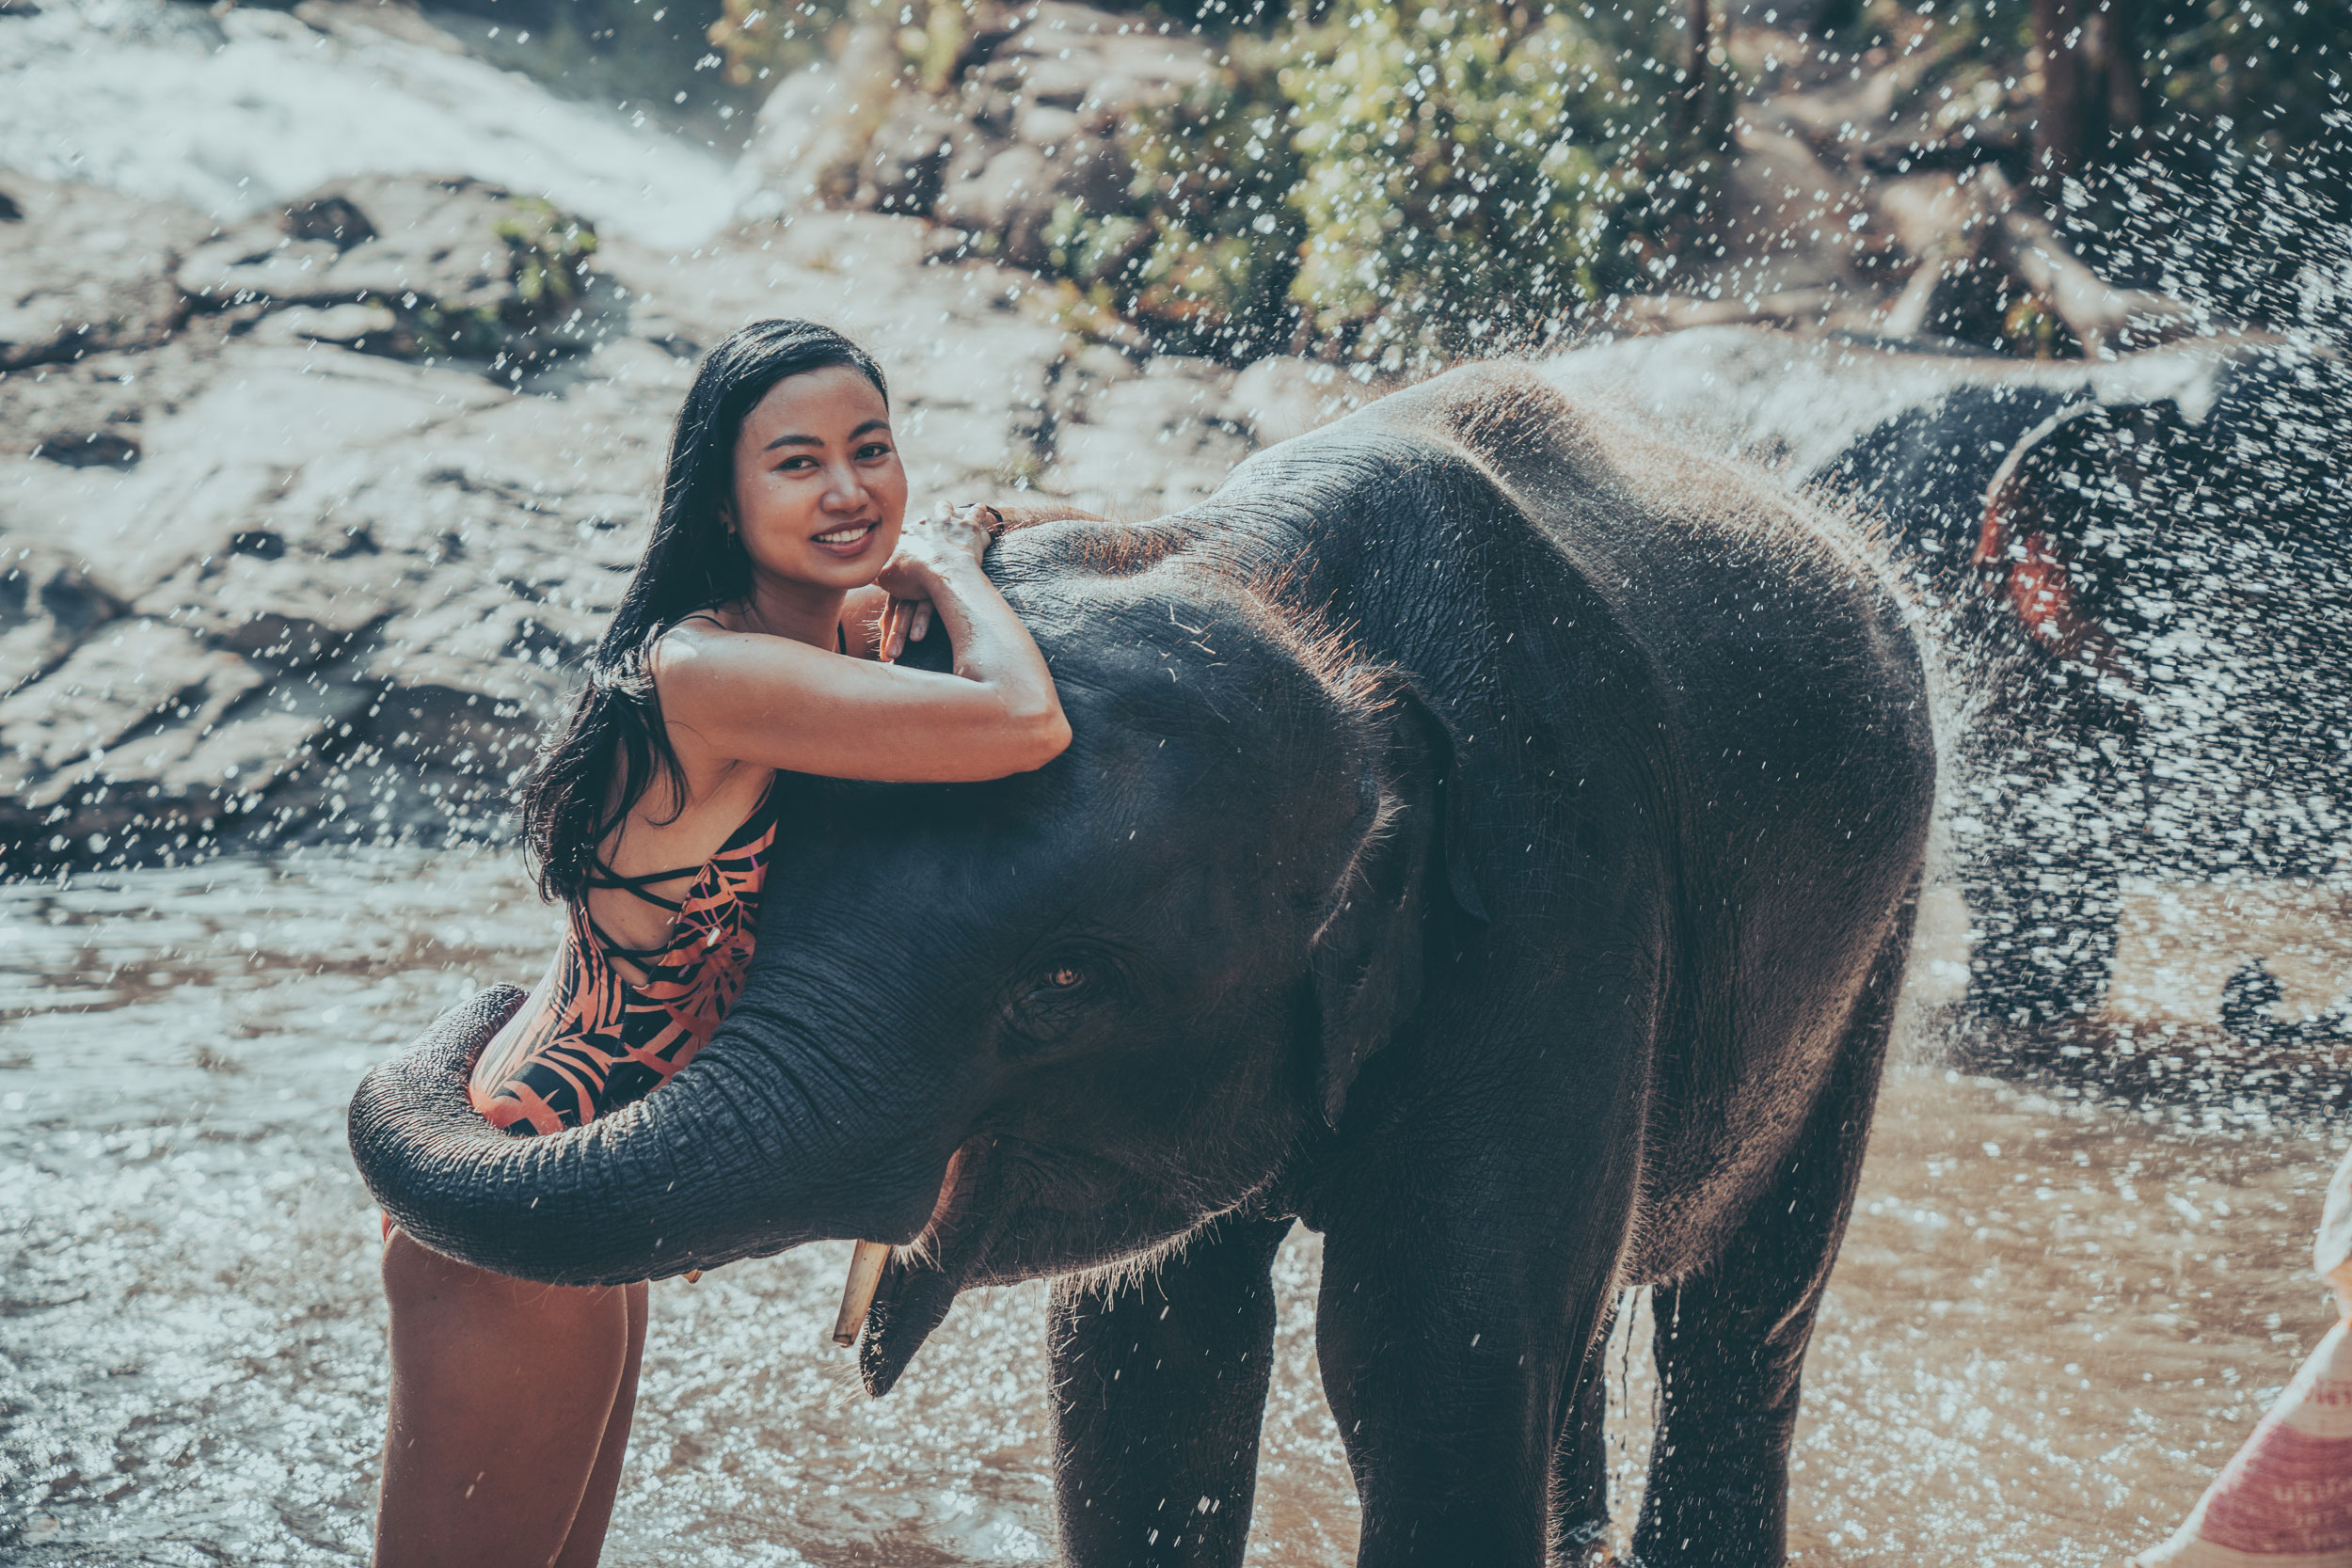 A lovely photo of a girl with a young elephant